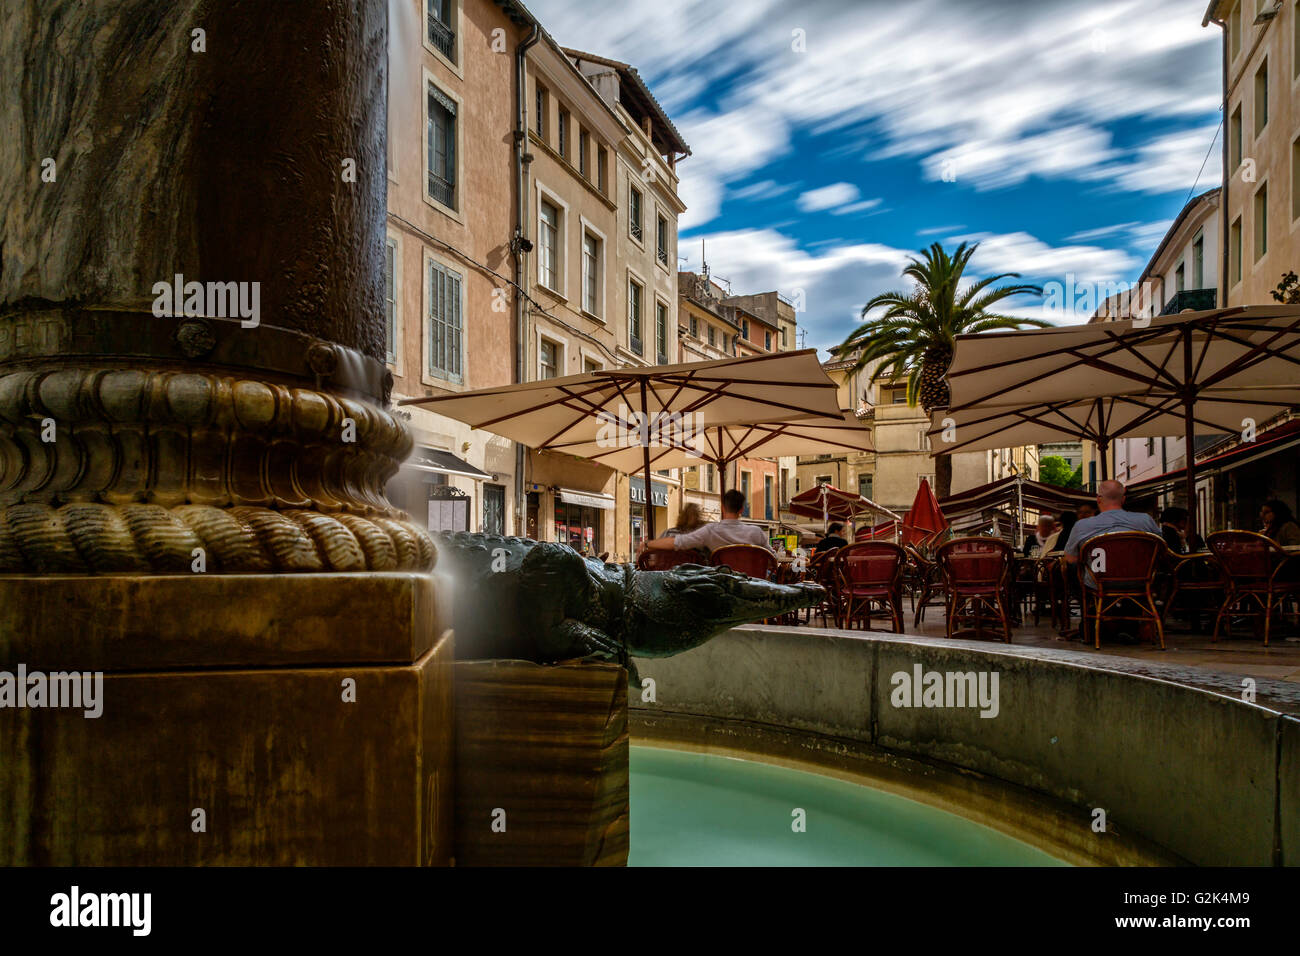 Place du Marche, The crocodile by Raysse, Nimes, Gard, France Stock Photo